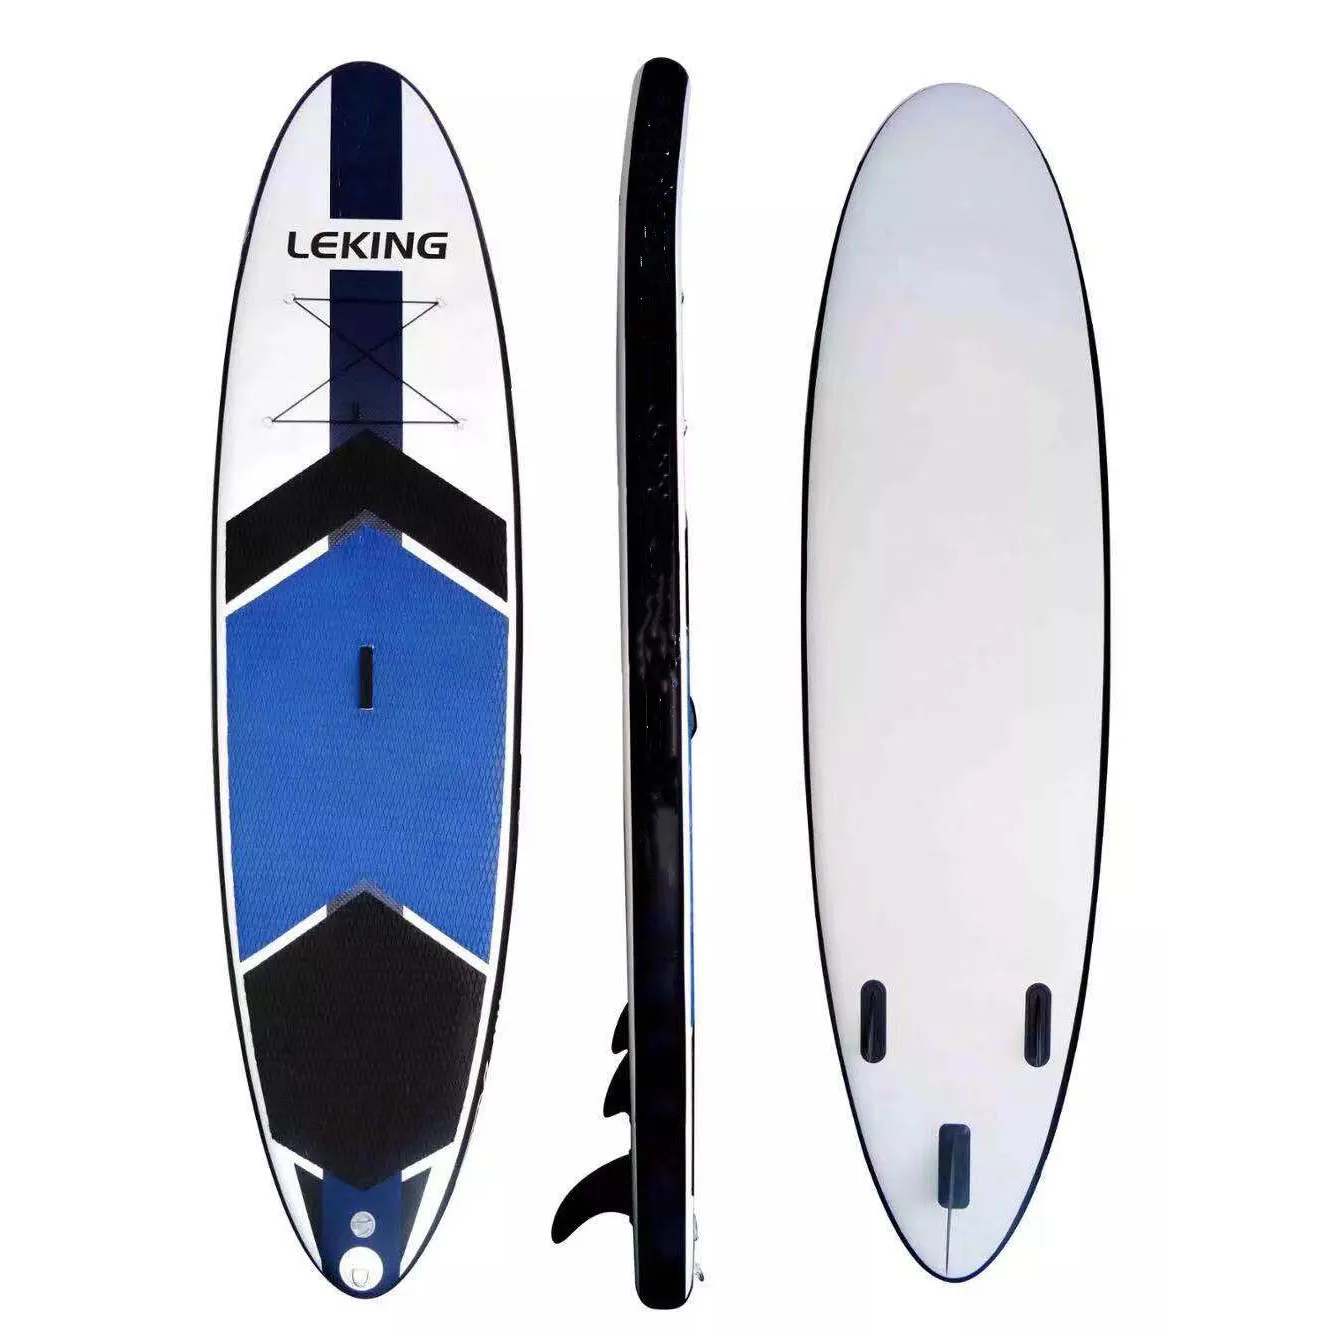 Summer Hot Sell Inflatable Stand Up Paddle Sup Board With Seat Ready To Ship Buy Inflatable Stand Up Paddle Board Sup Board With Seat Paddle Board Product On Alibaba Com